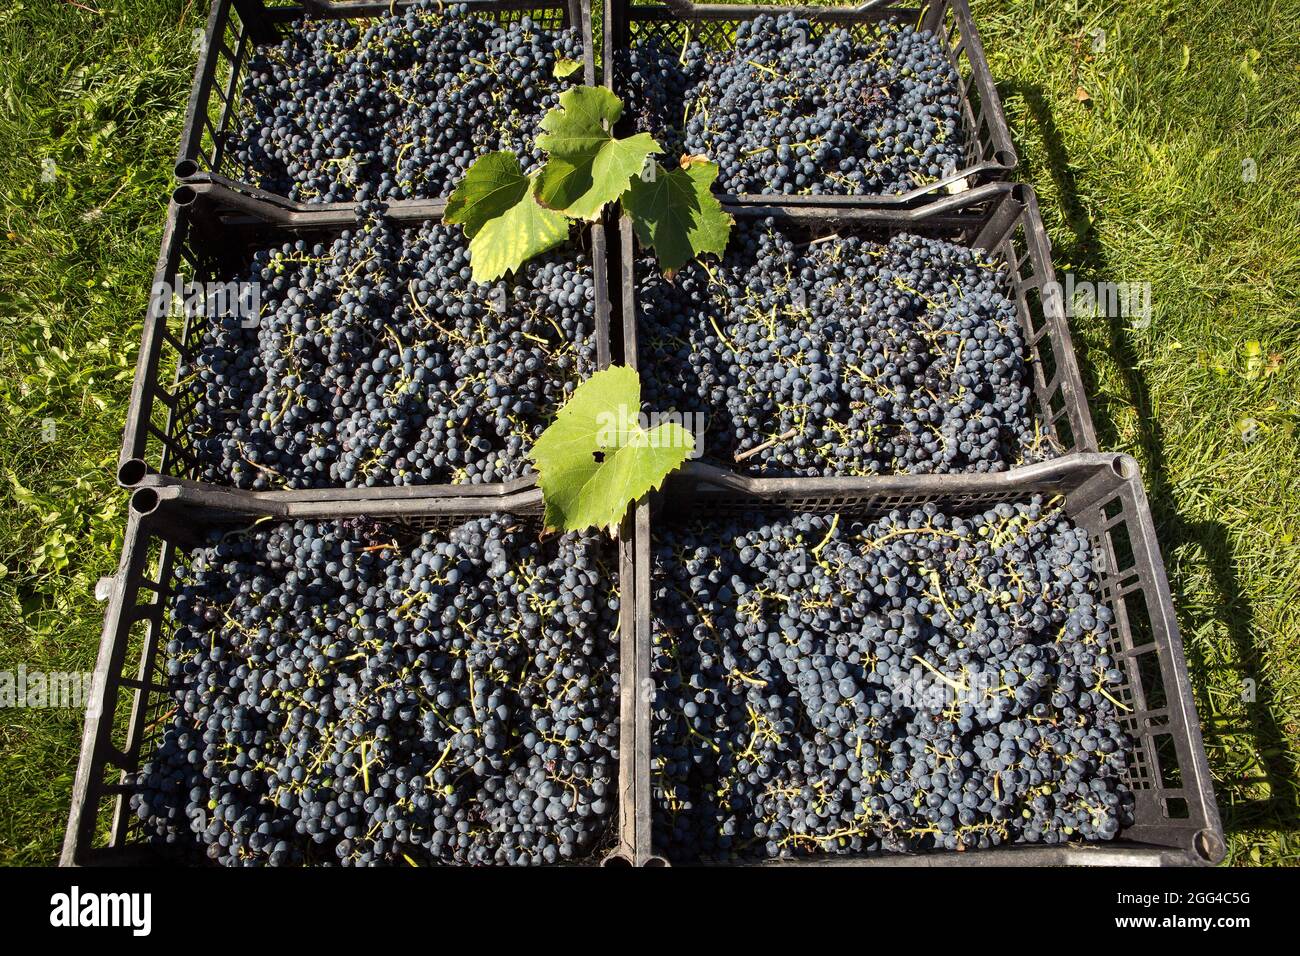 Grape harvest. Wine grapes are collected in boxes. Autumn is the time of grape harvest and wine making. Stock Photo